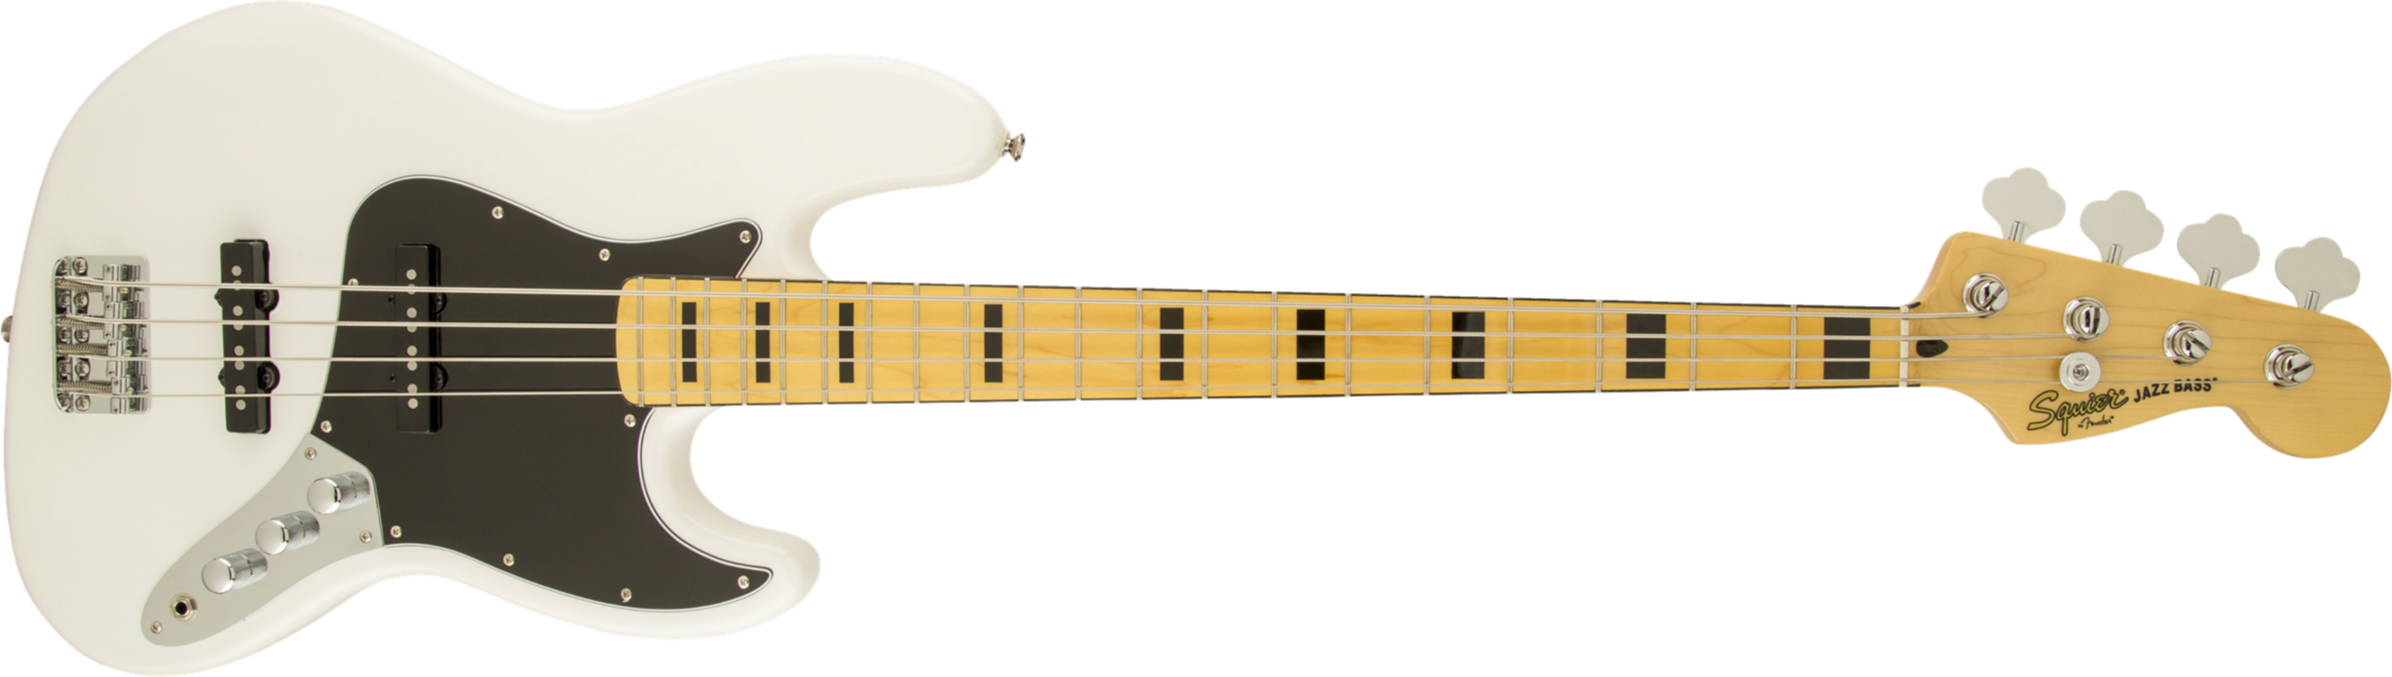 Squier Jazz Bass Vintage Modified 70 2013 Mn Olympic White - Solid body electric bass - Main picture